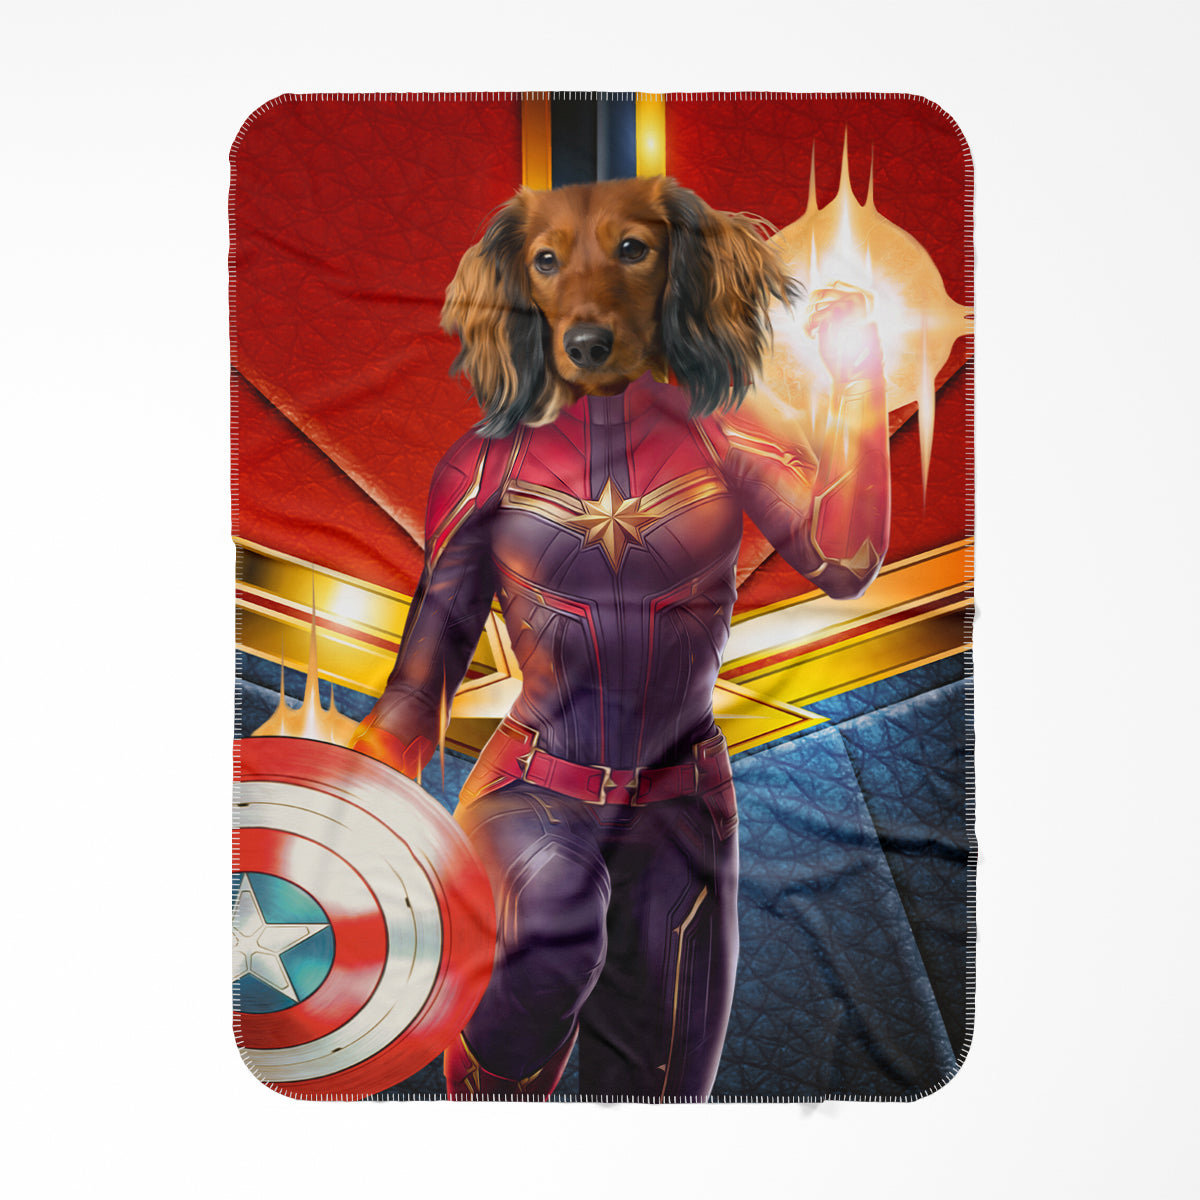 Captain Marvel: Custom Pet Blanket - Paw & Glory - #pet portraits# - #dog portraits# - #pet portraits uk#Paw and glory, Pet portraits blanket,dog fluffy blanket, personalised blankets for dogs, dog in blankets, dog printed blanket, put your dog's face on a blanket